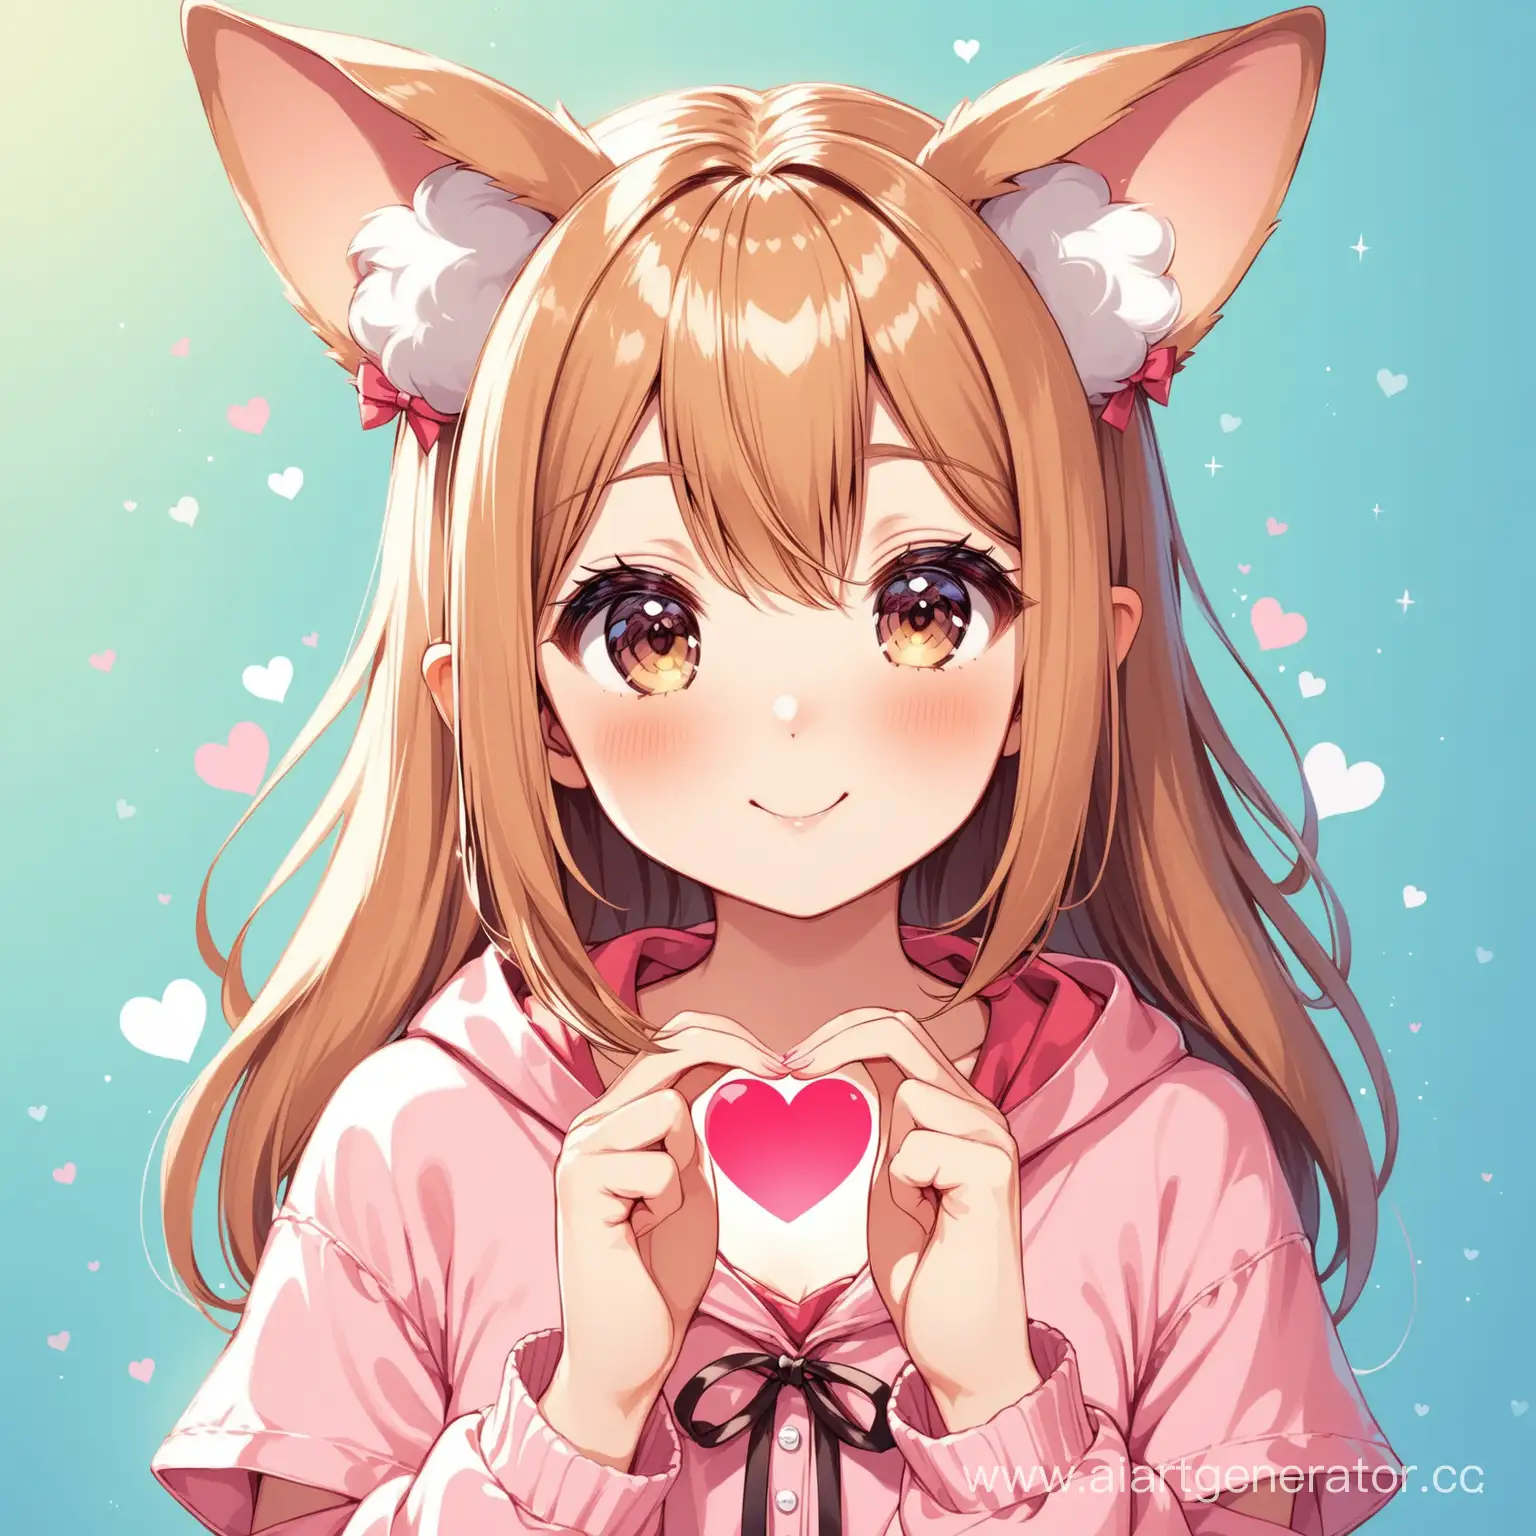 Adorable-Girl-with-Ears-Expresses-Love-with-Heart-Gesture